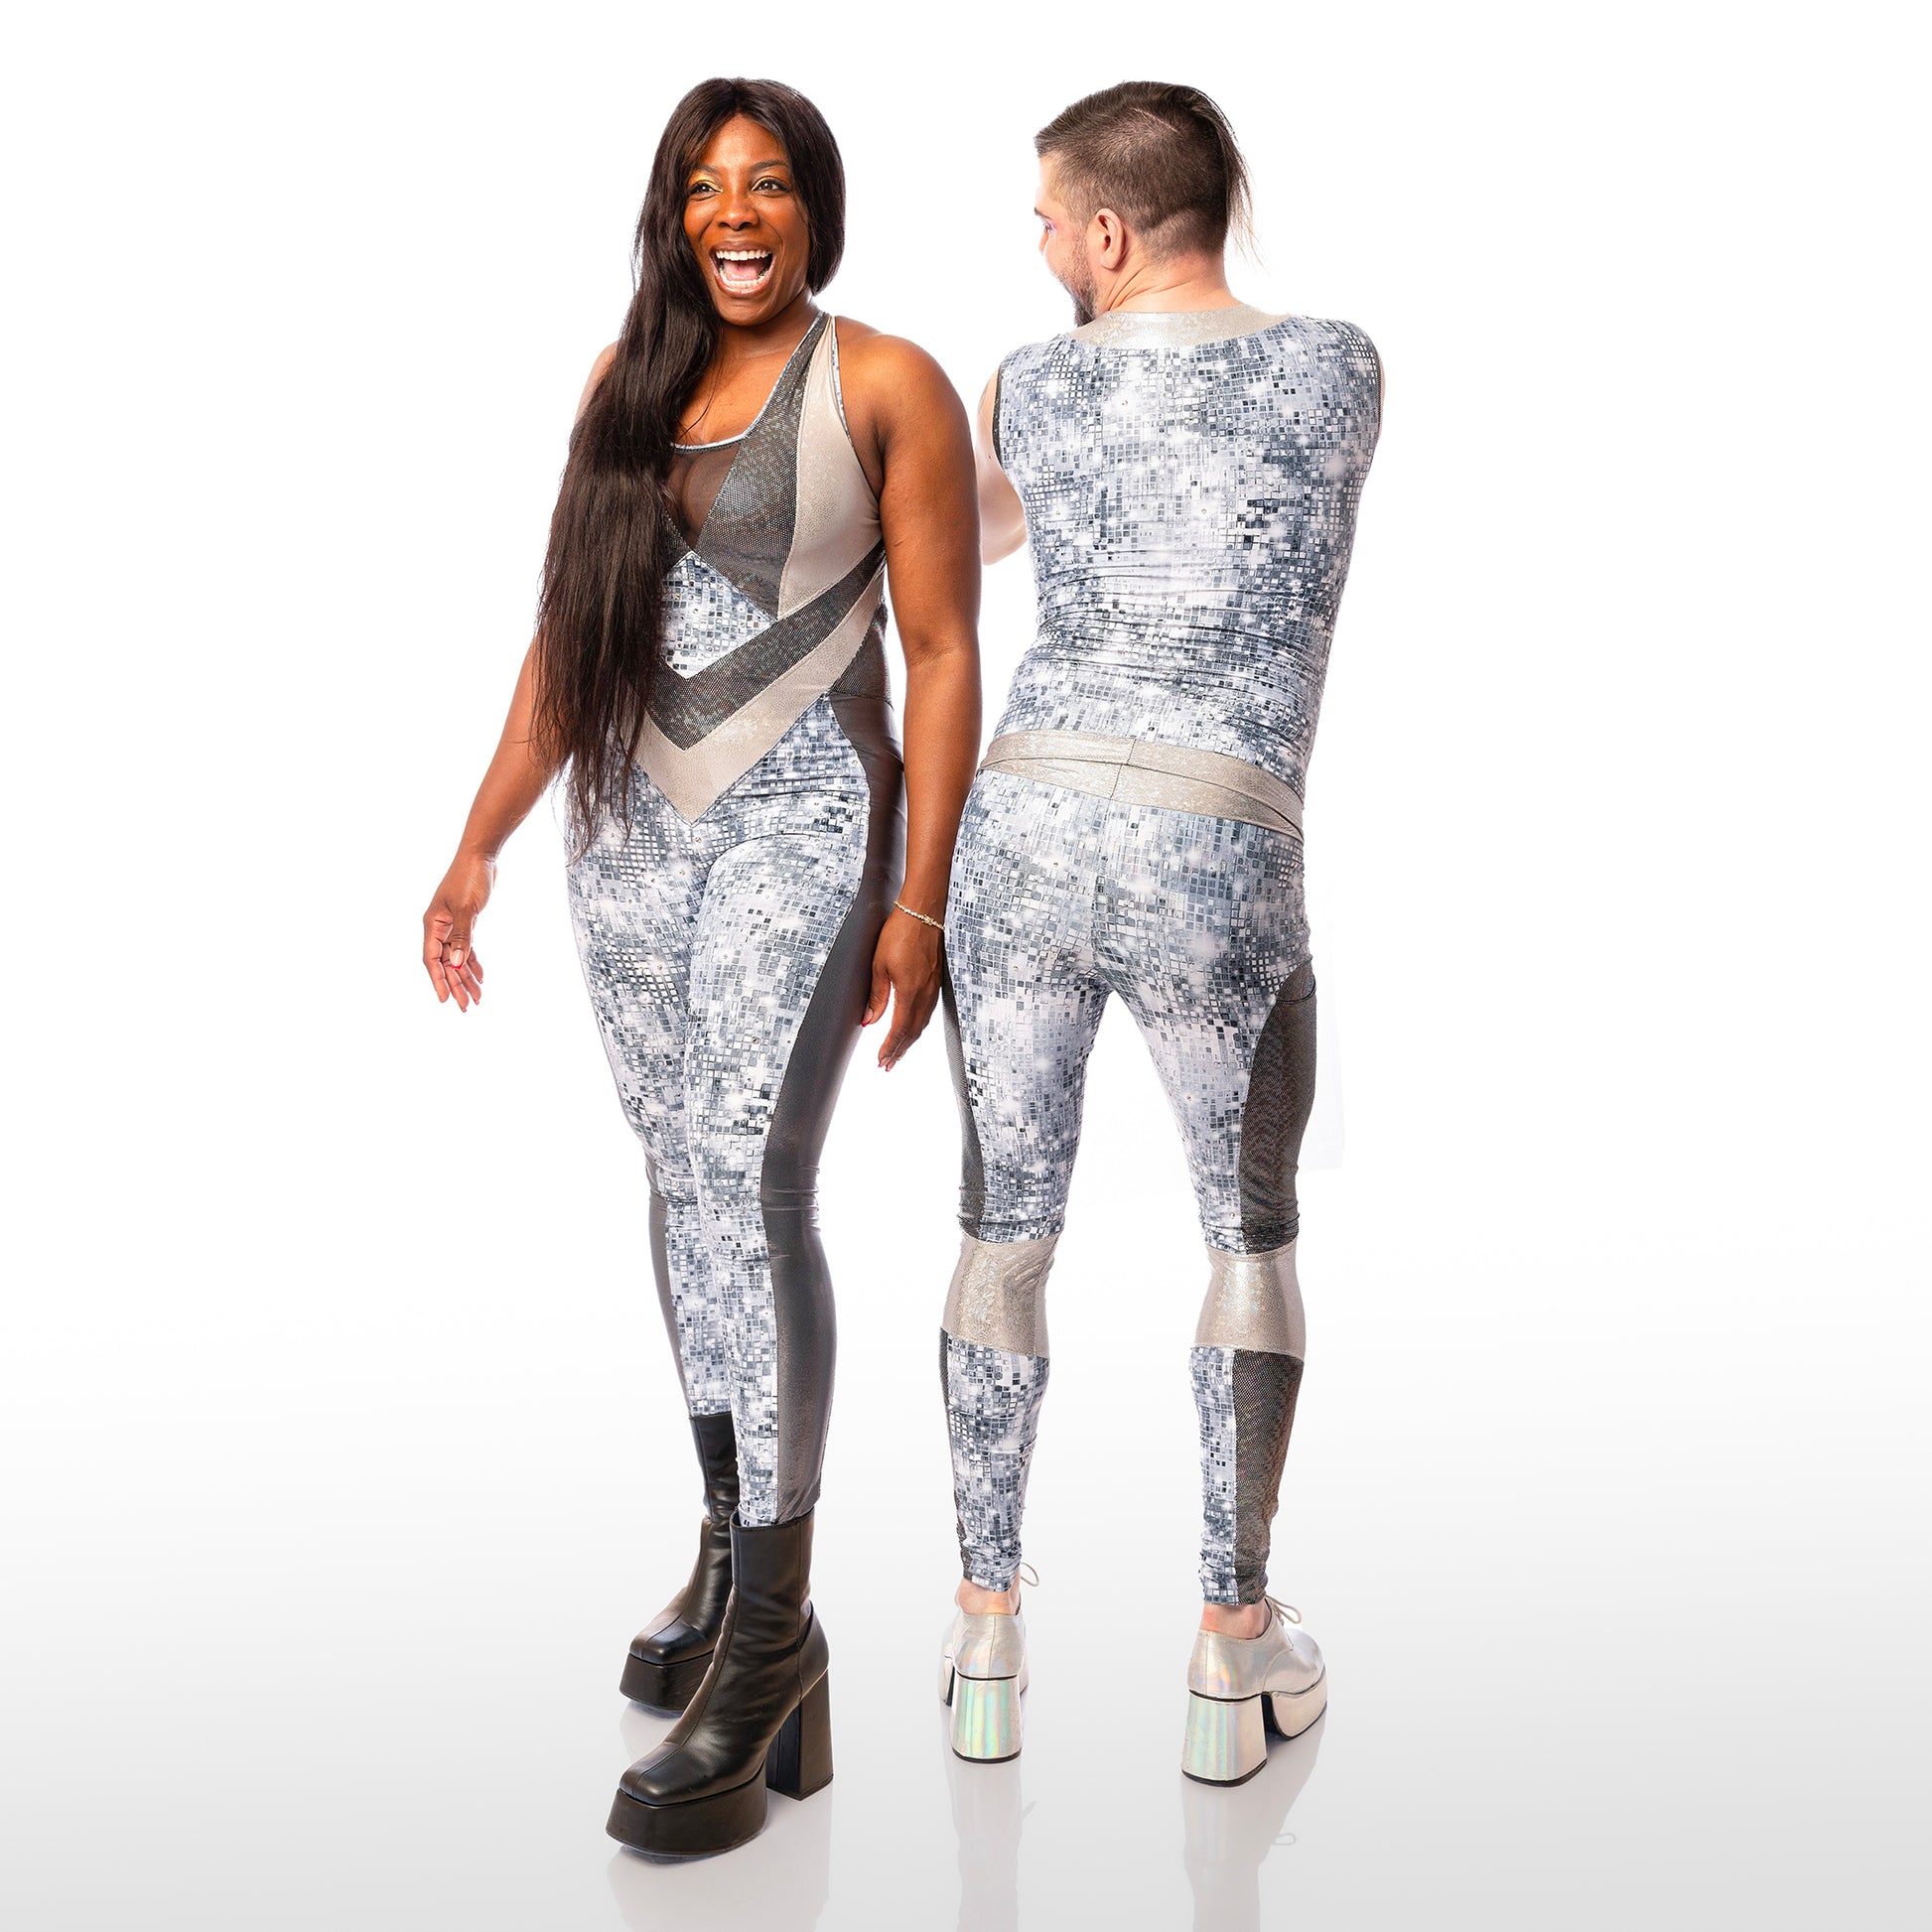 Disco Diva Leggings, a handmade-to-order piece in disco ball and silver foil print spandex. The leggings feature a double layer high waist with light silver knee panels and granite foil curved leg panels. Models Max and Roslyne stand side by side. Max has their back to the camera and Roslyne stands front on. Roslyne wears a matching catsuit. 